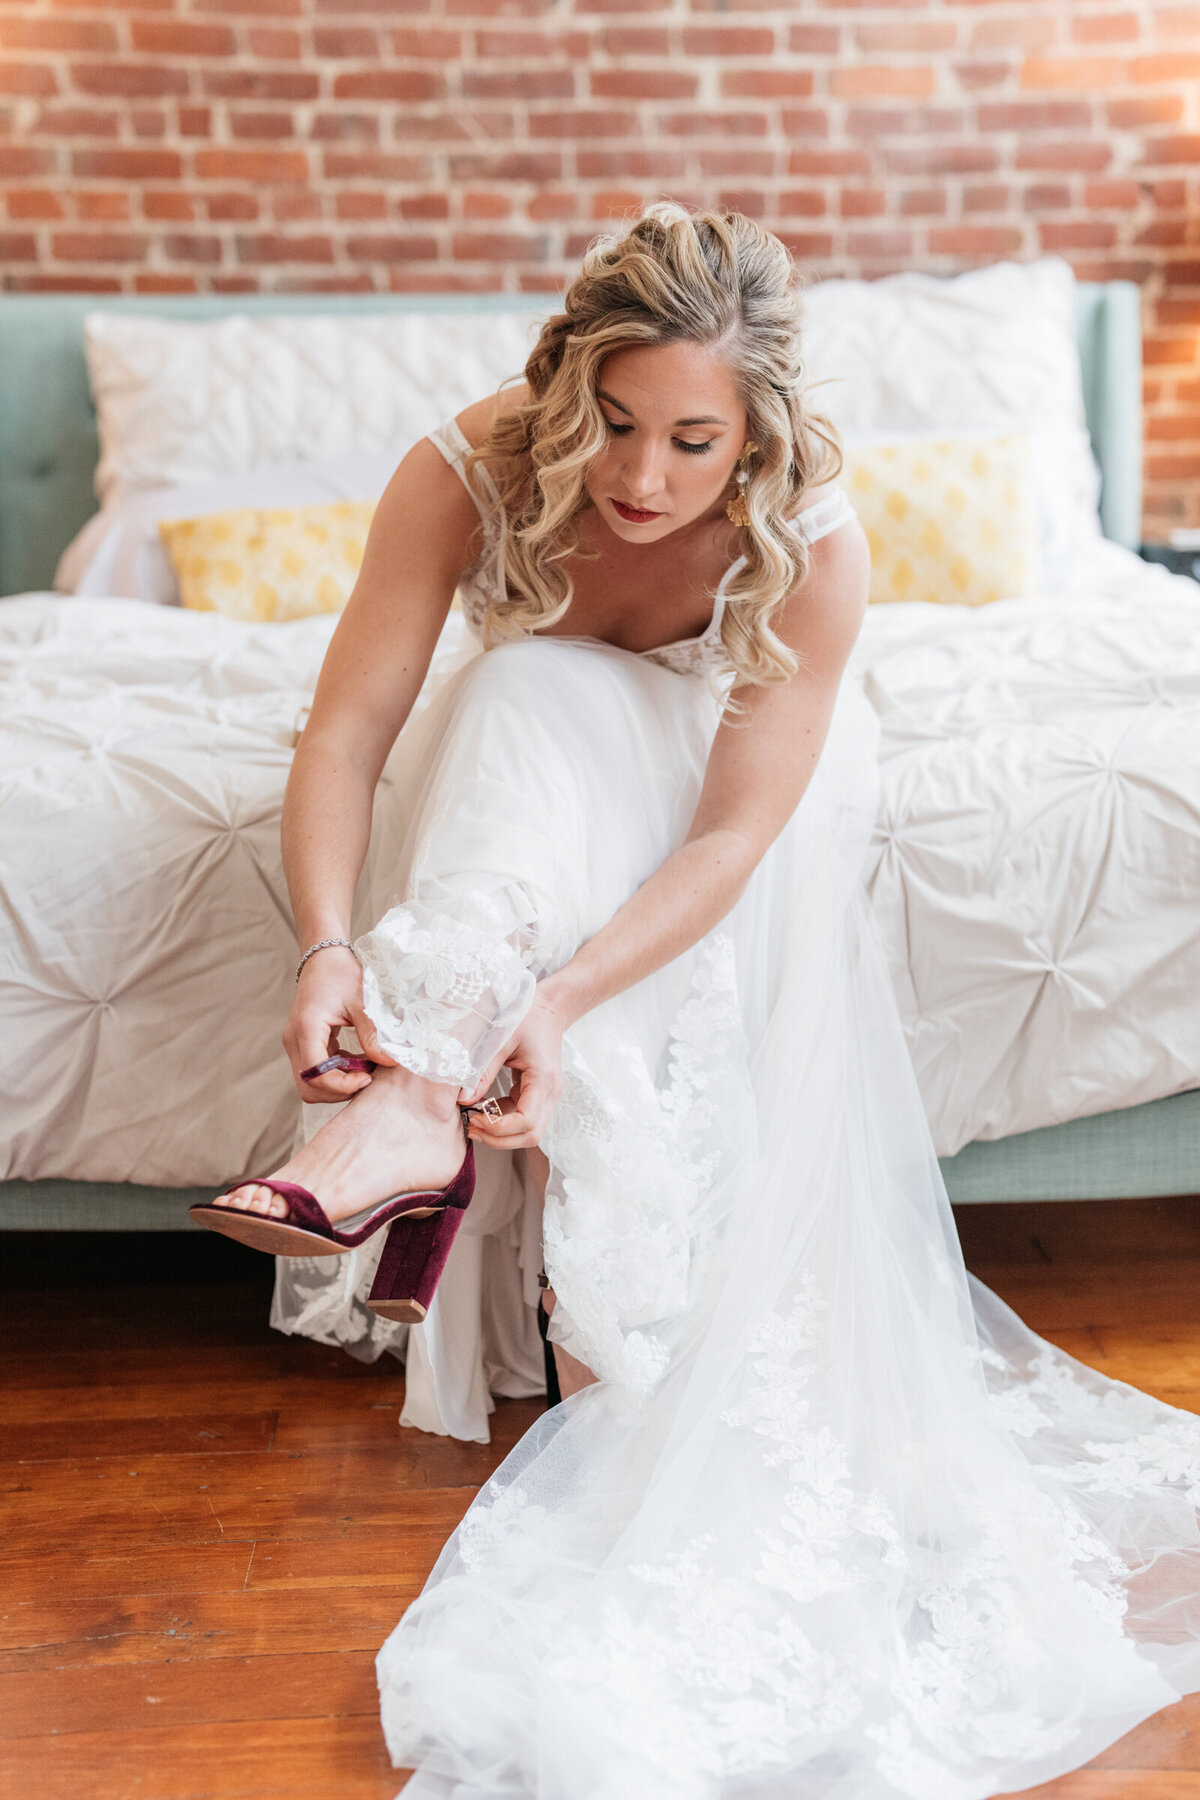 bride putting on shoes on wedding day